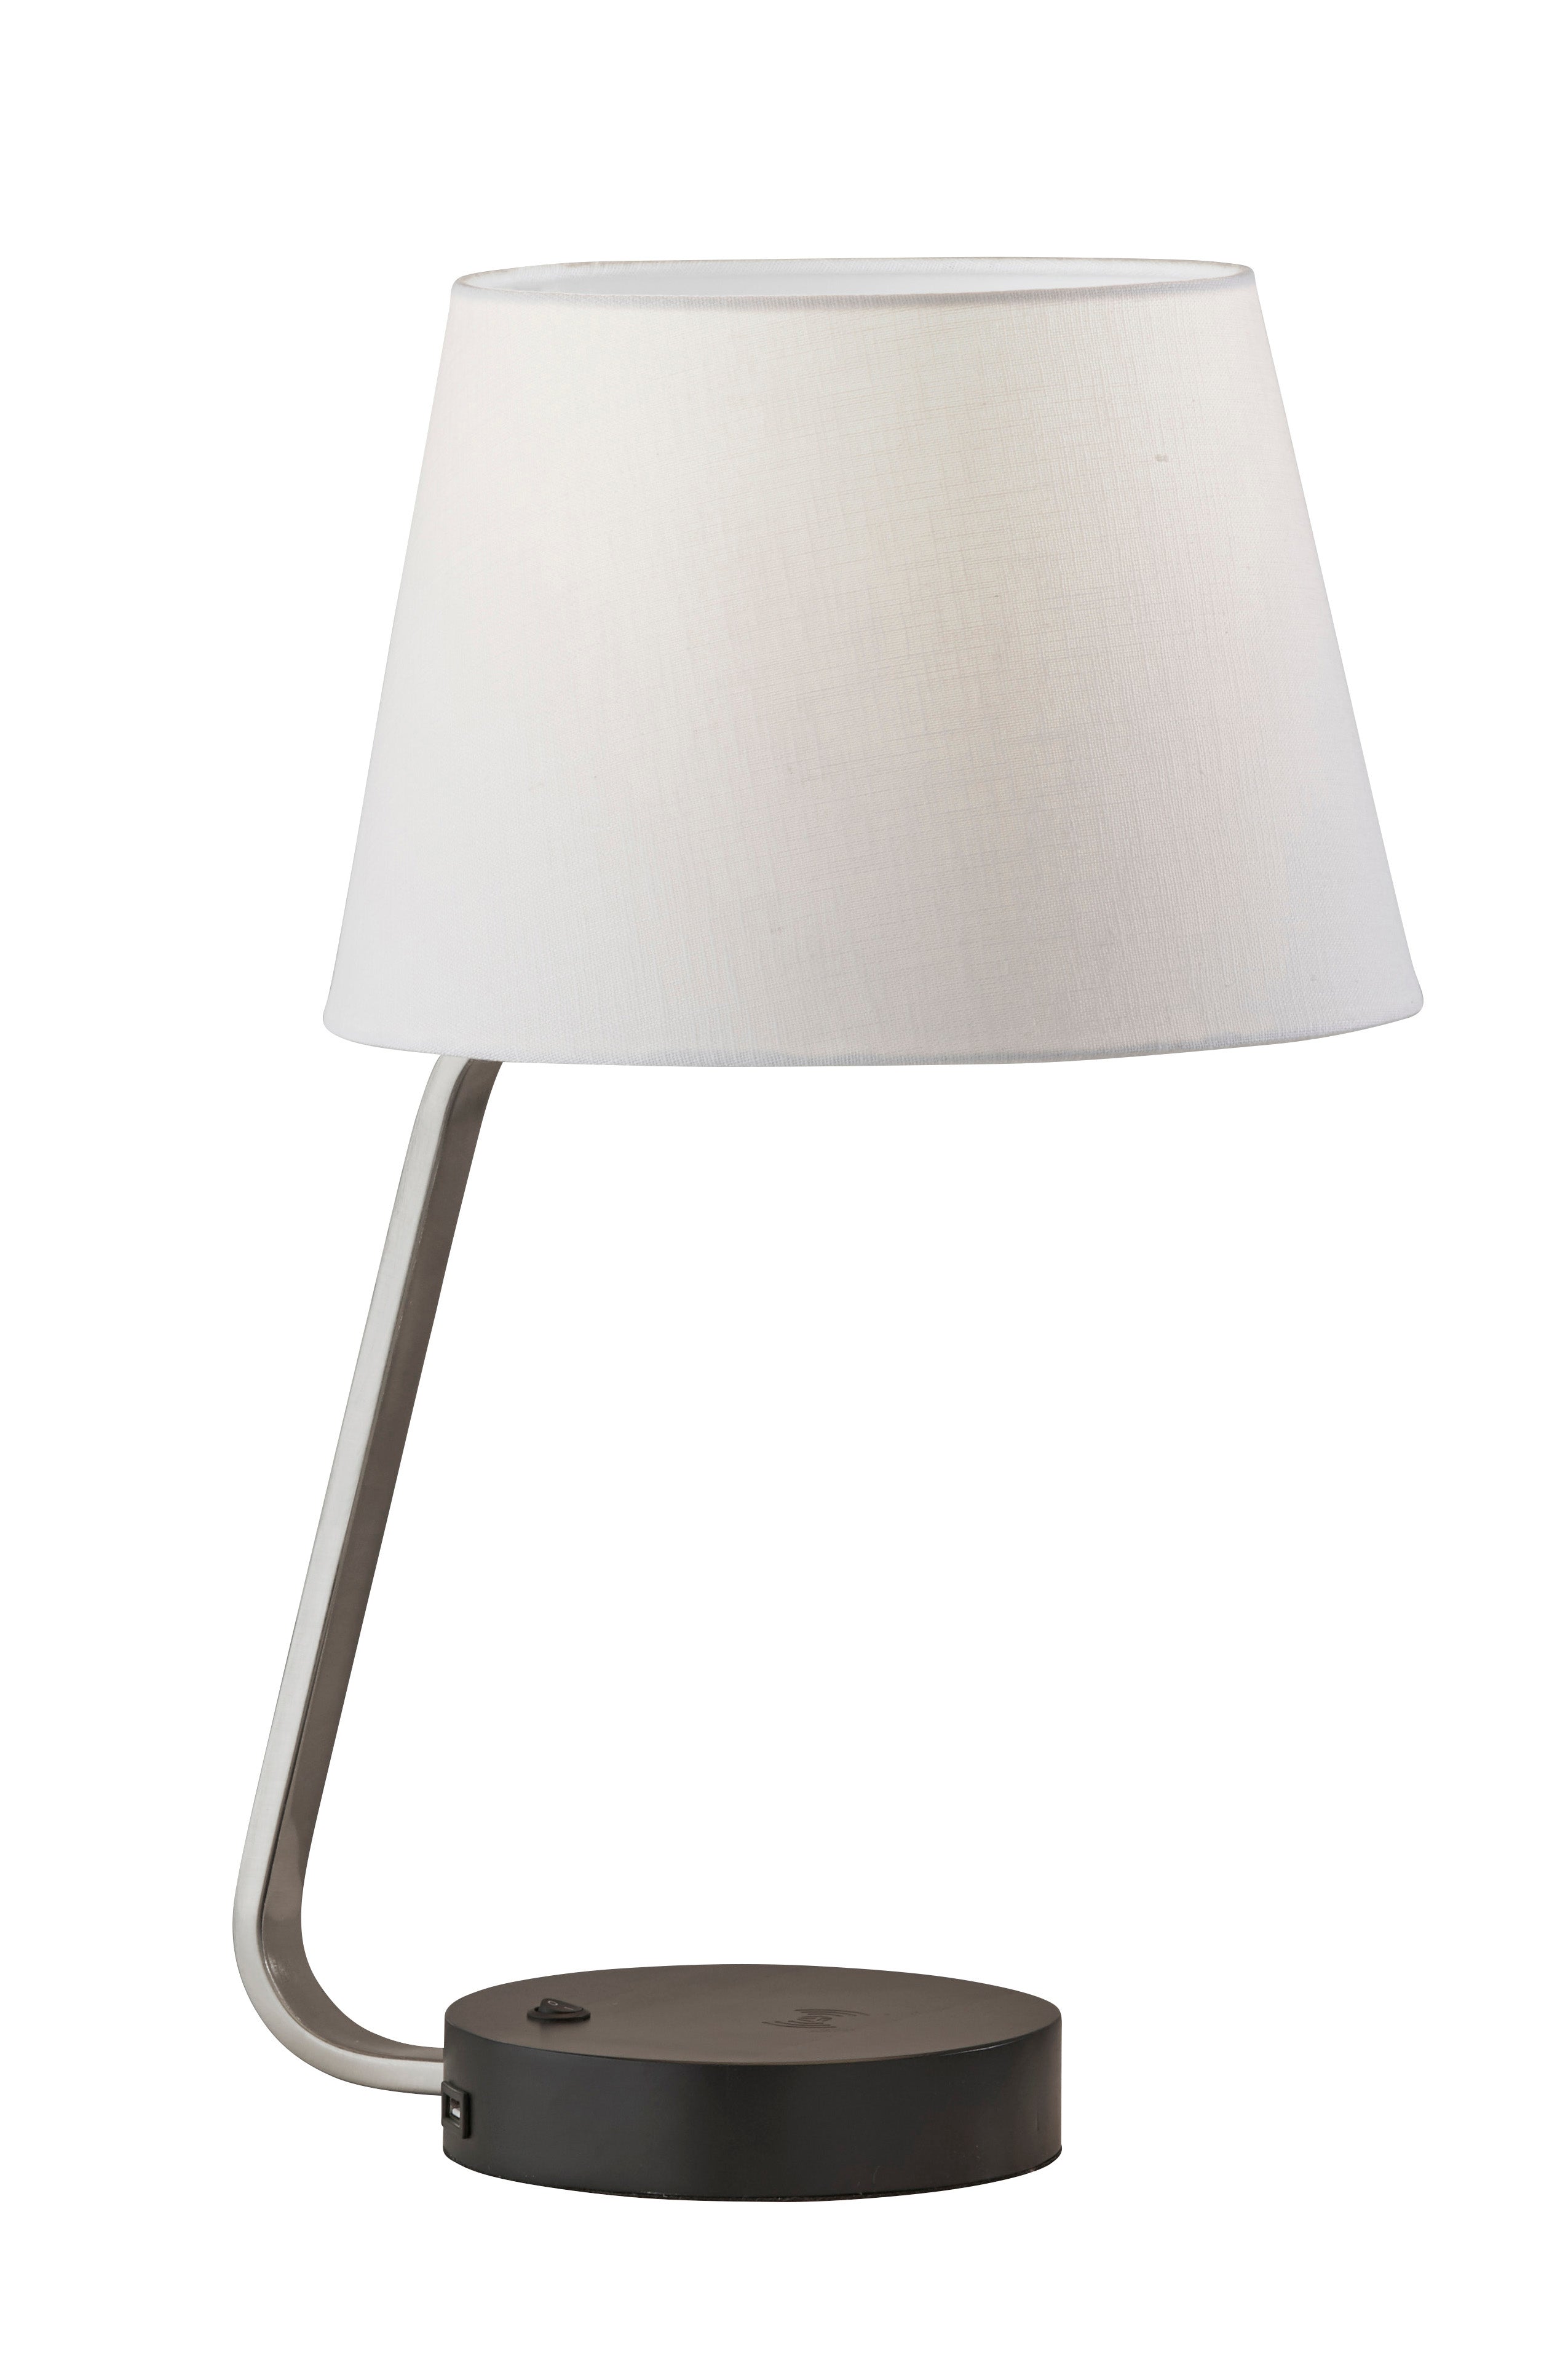 LOUIE Table lamp Stainless steel, Wood - 3015-22 | ADESSO